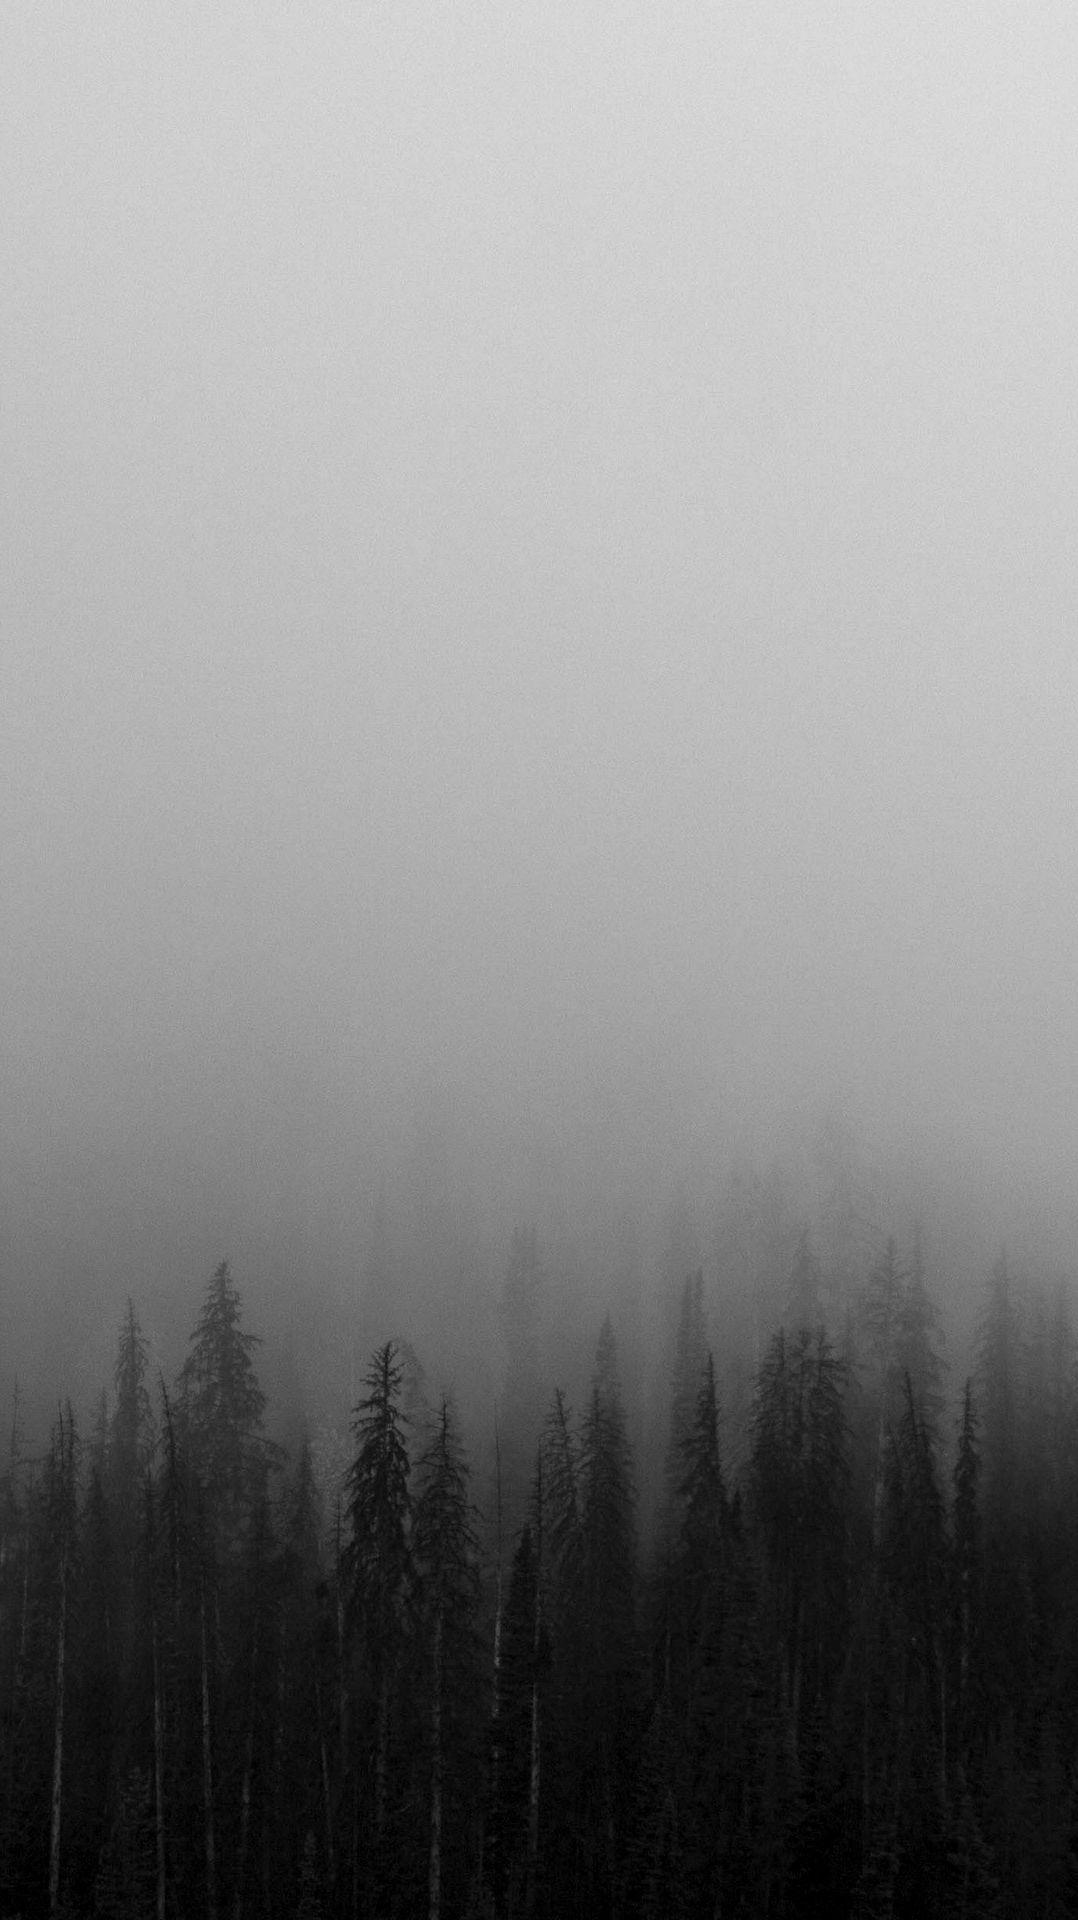 Black And White Forest Wallpapers Top, Black And White Forest Landscape